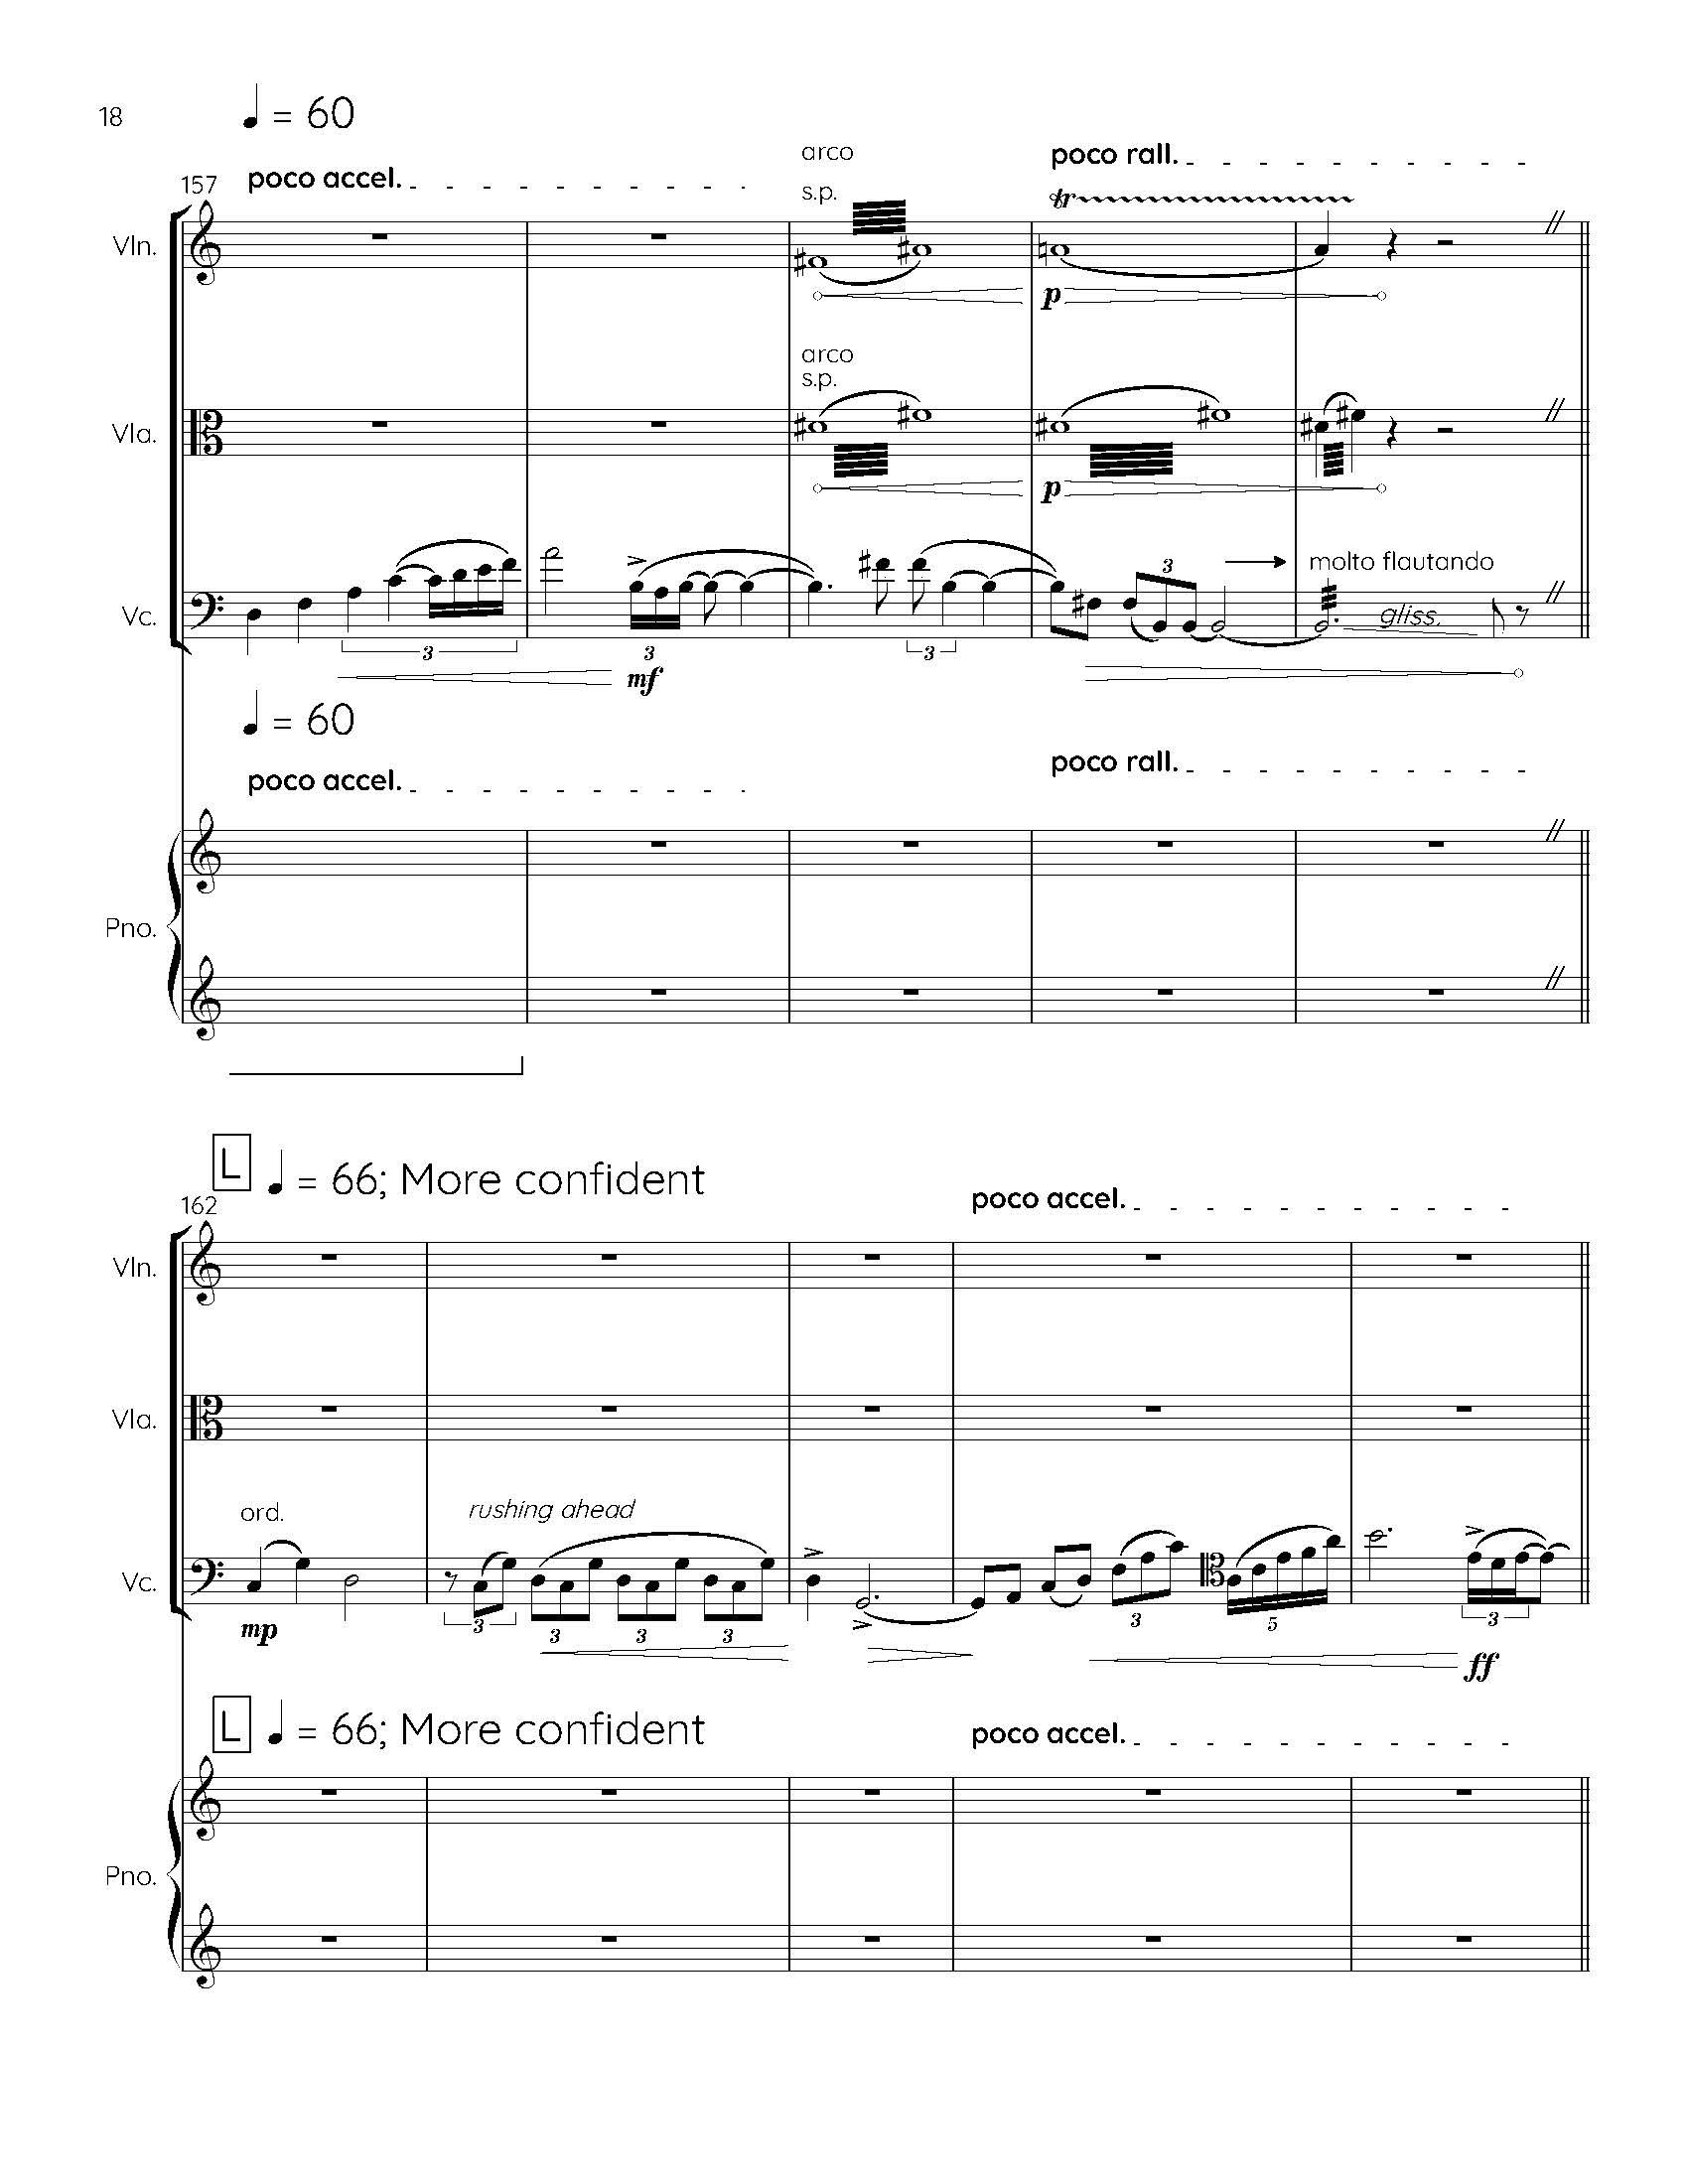 I S L A N D I - Complete Score_Page_24.jpg